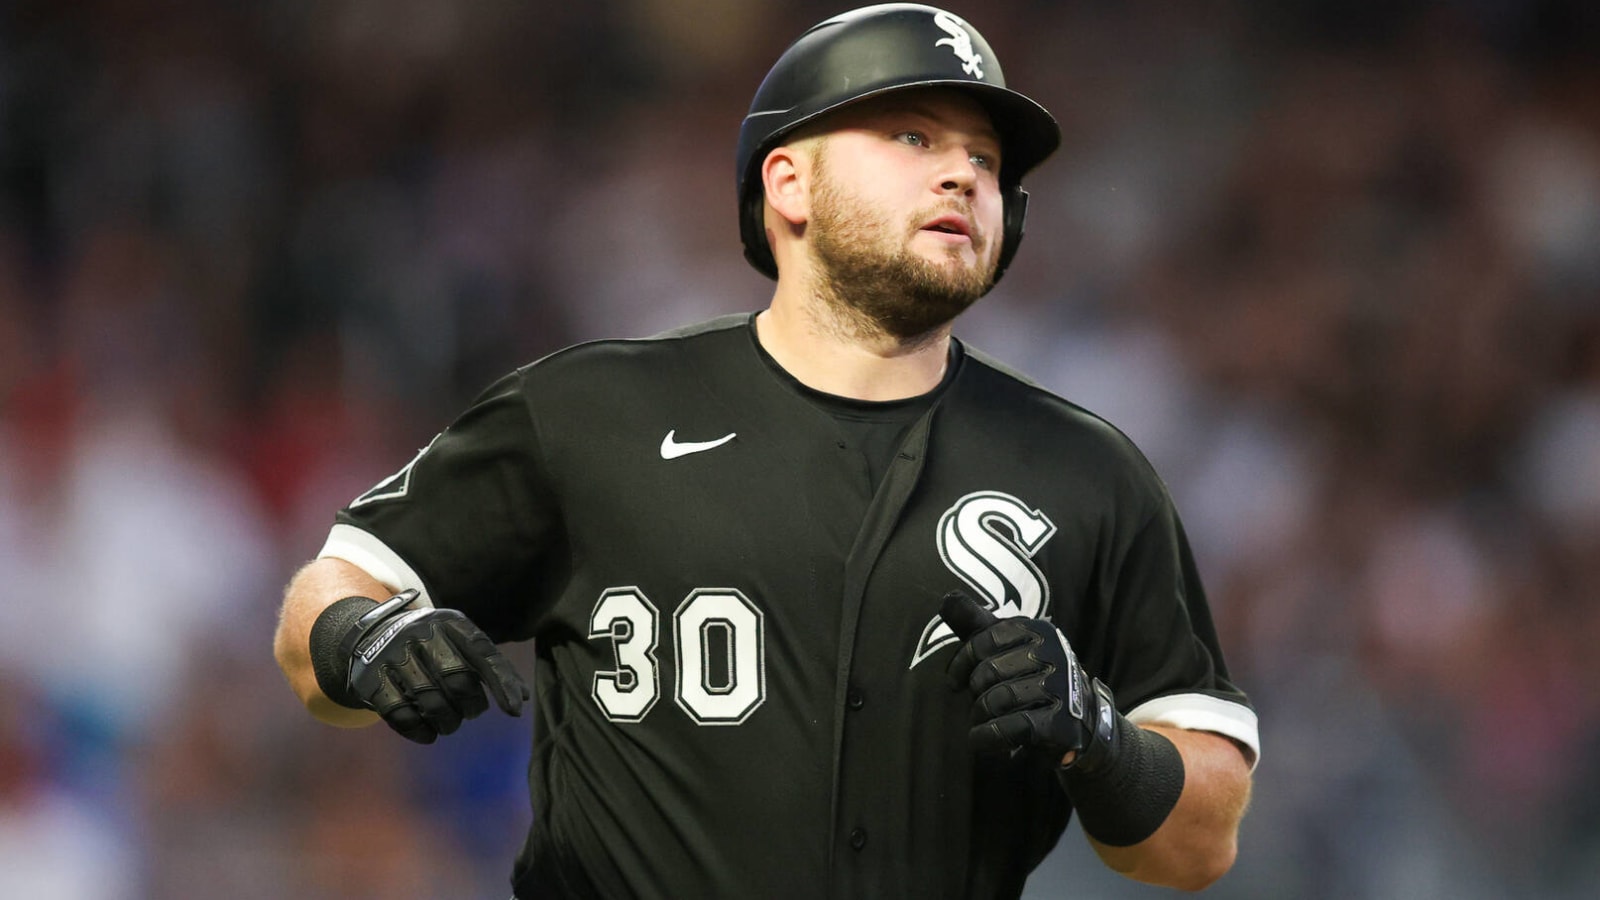 TRADE 🚨 The Marlins are acquiring Jake Burger from the White Sox, per  Craig Mish